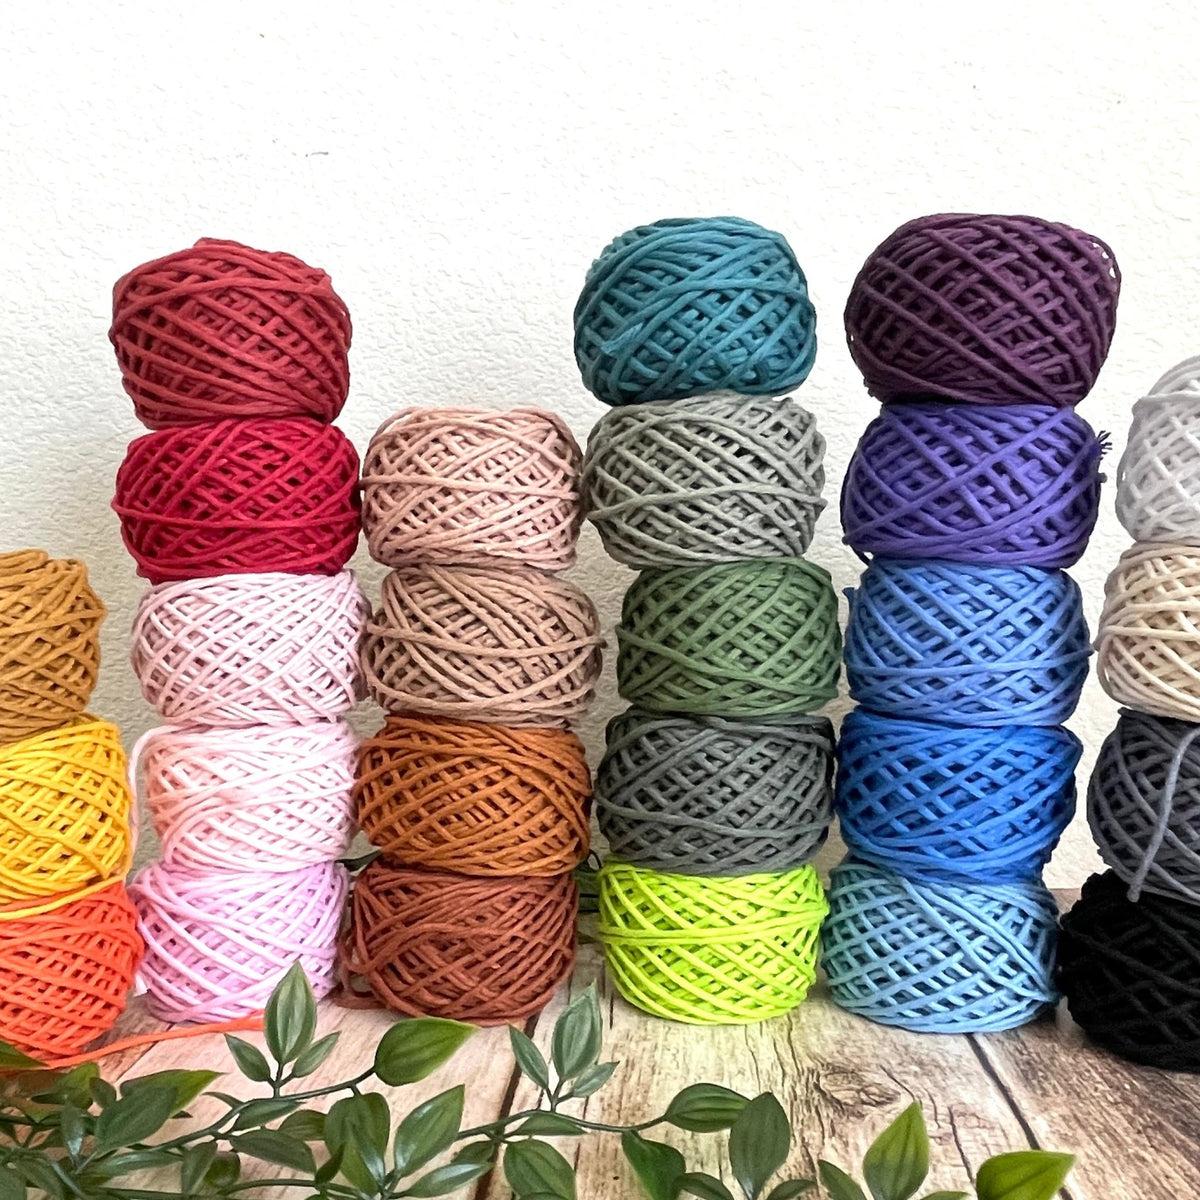 Recycled Cotton Ropes For Macrame & Weaving - 2mm 3 ply